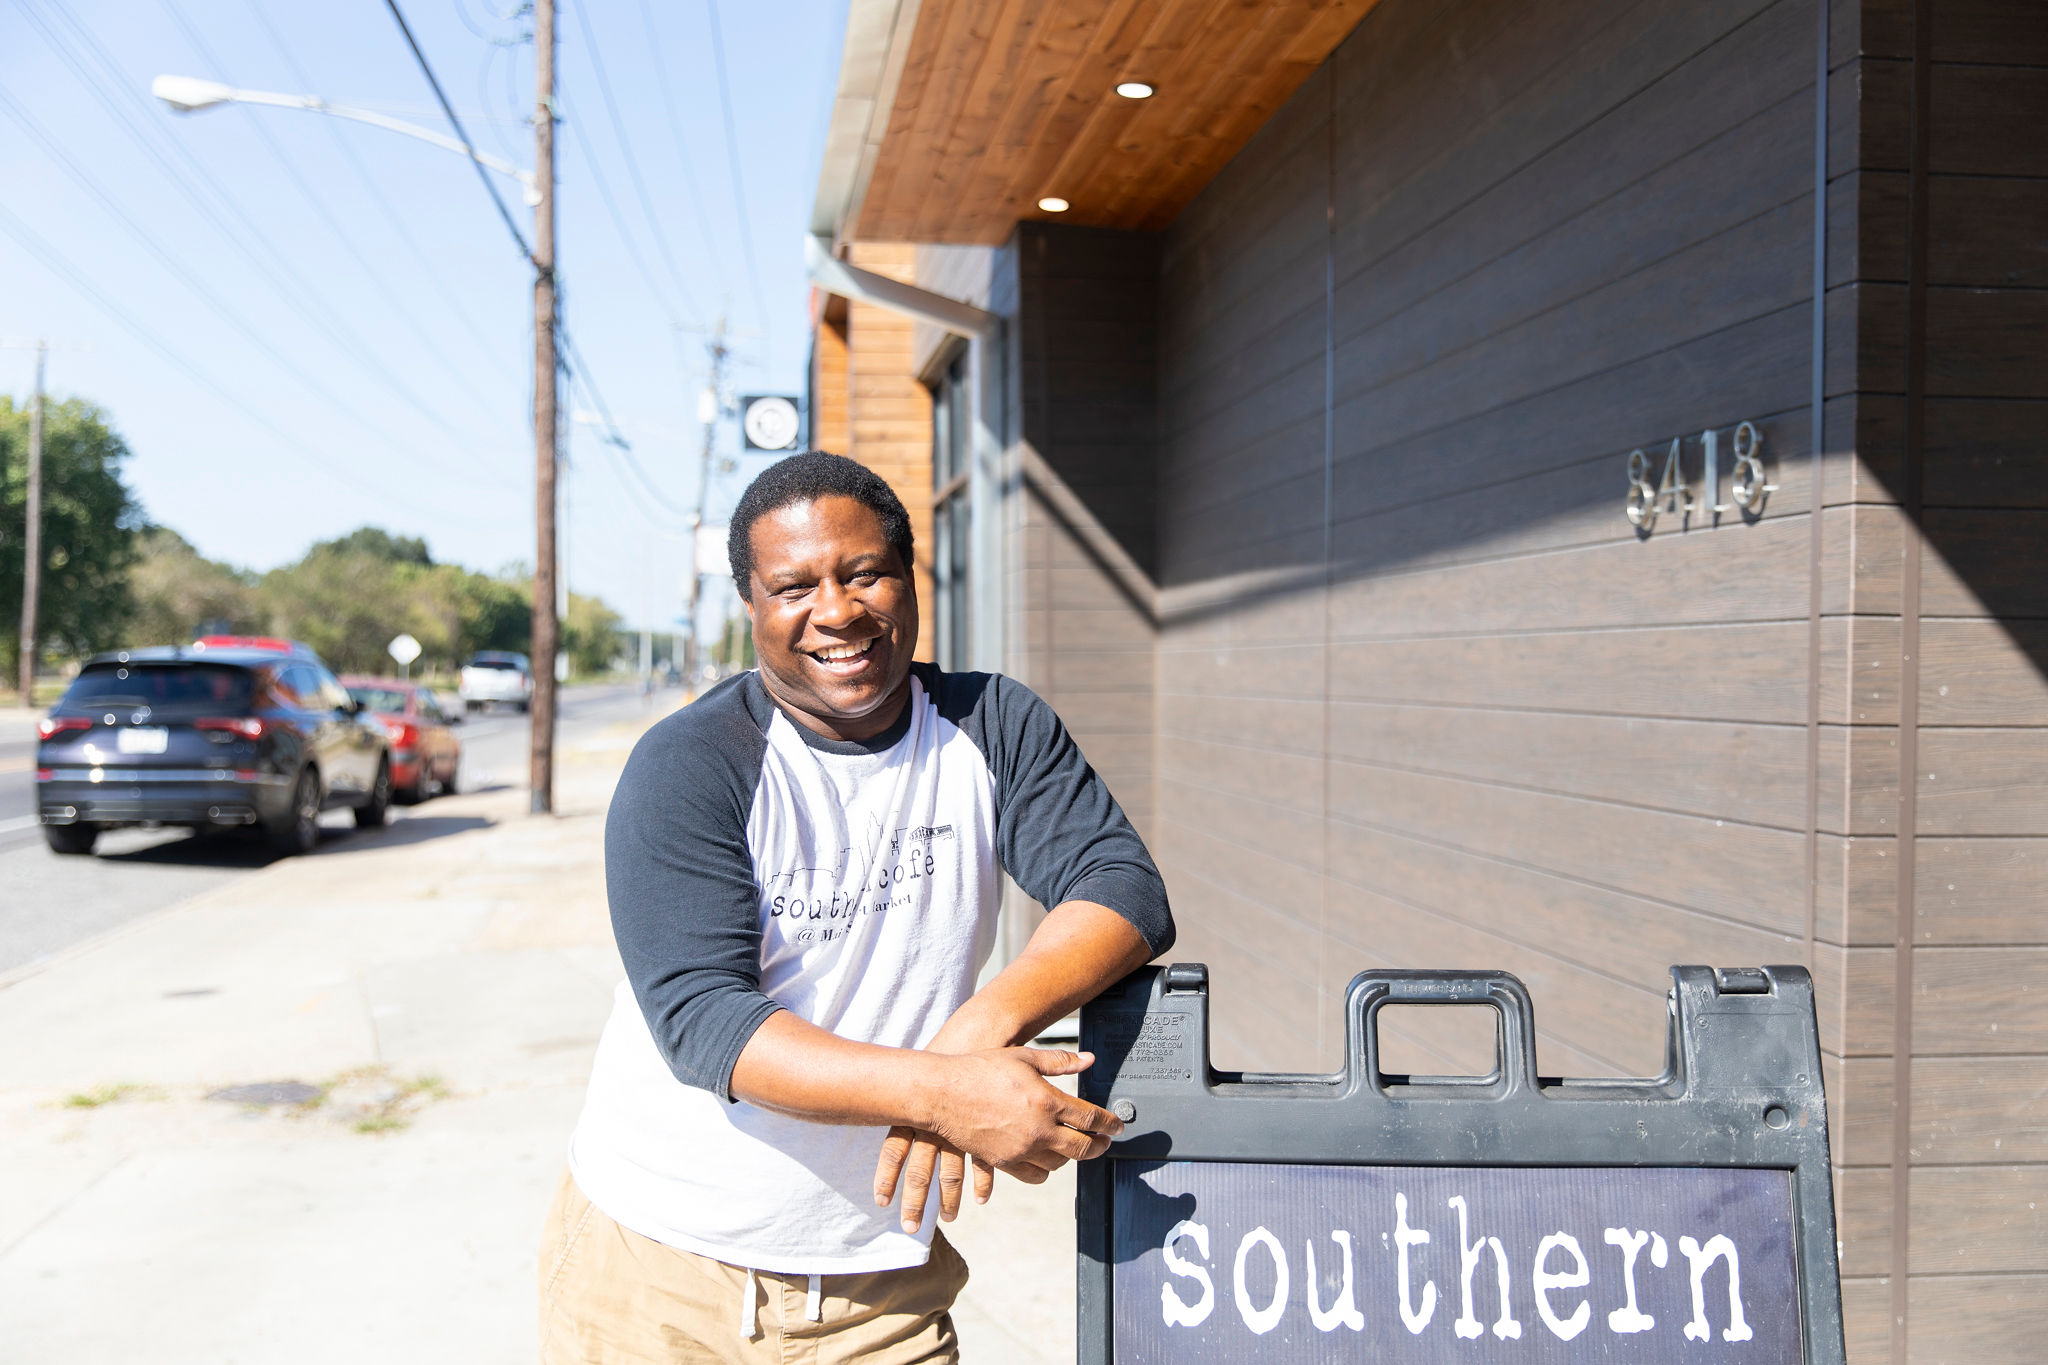 Inside the updated Southern Cofe, now open in Scotlandville with coffee, healthy food and a creative space